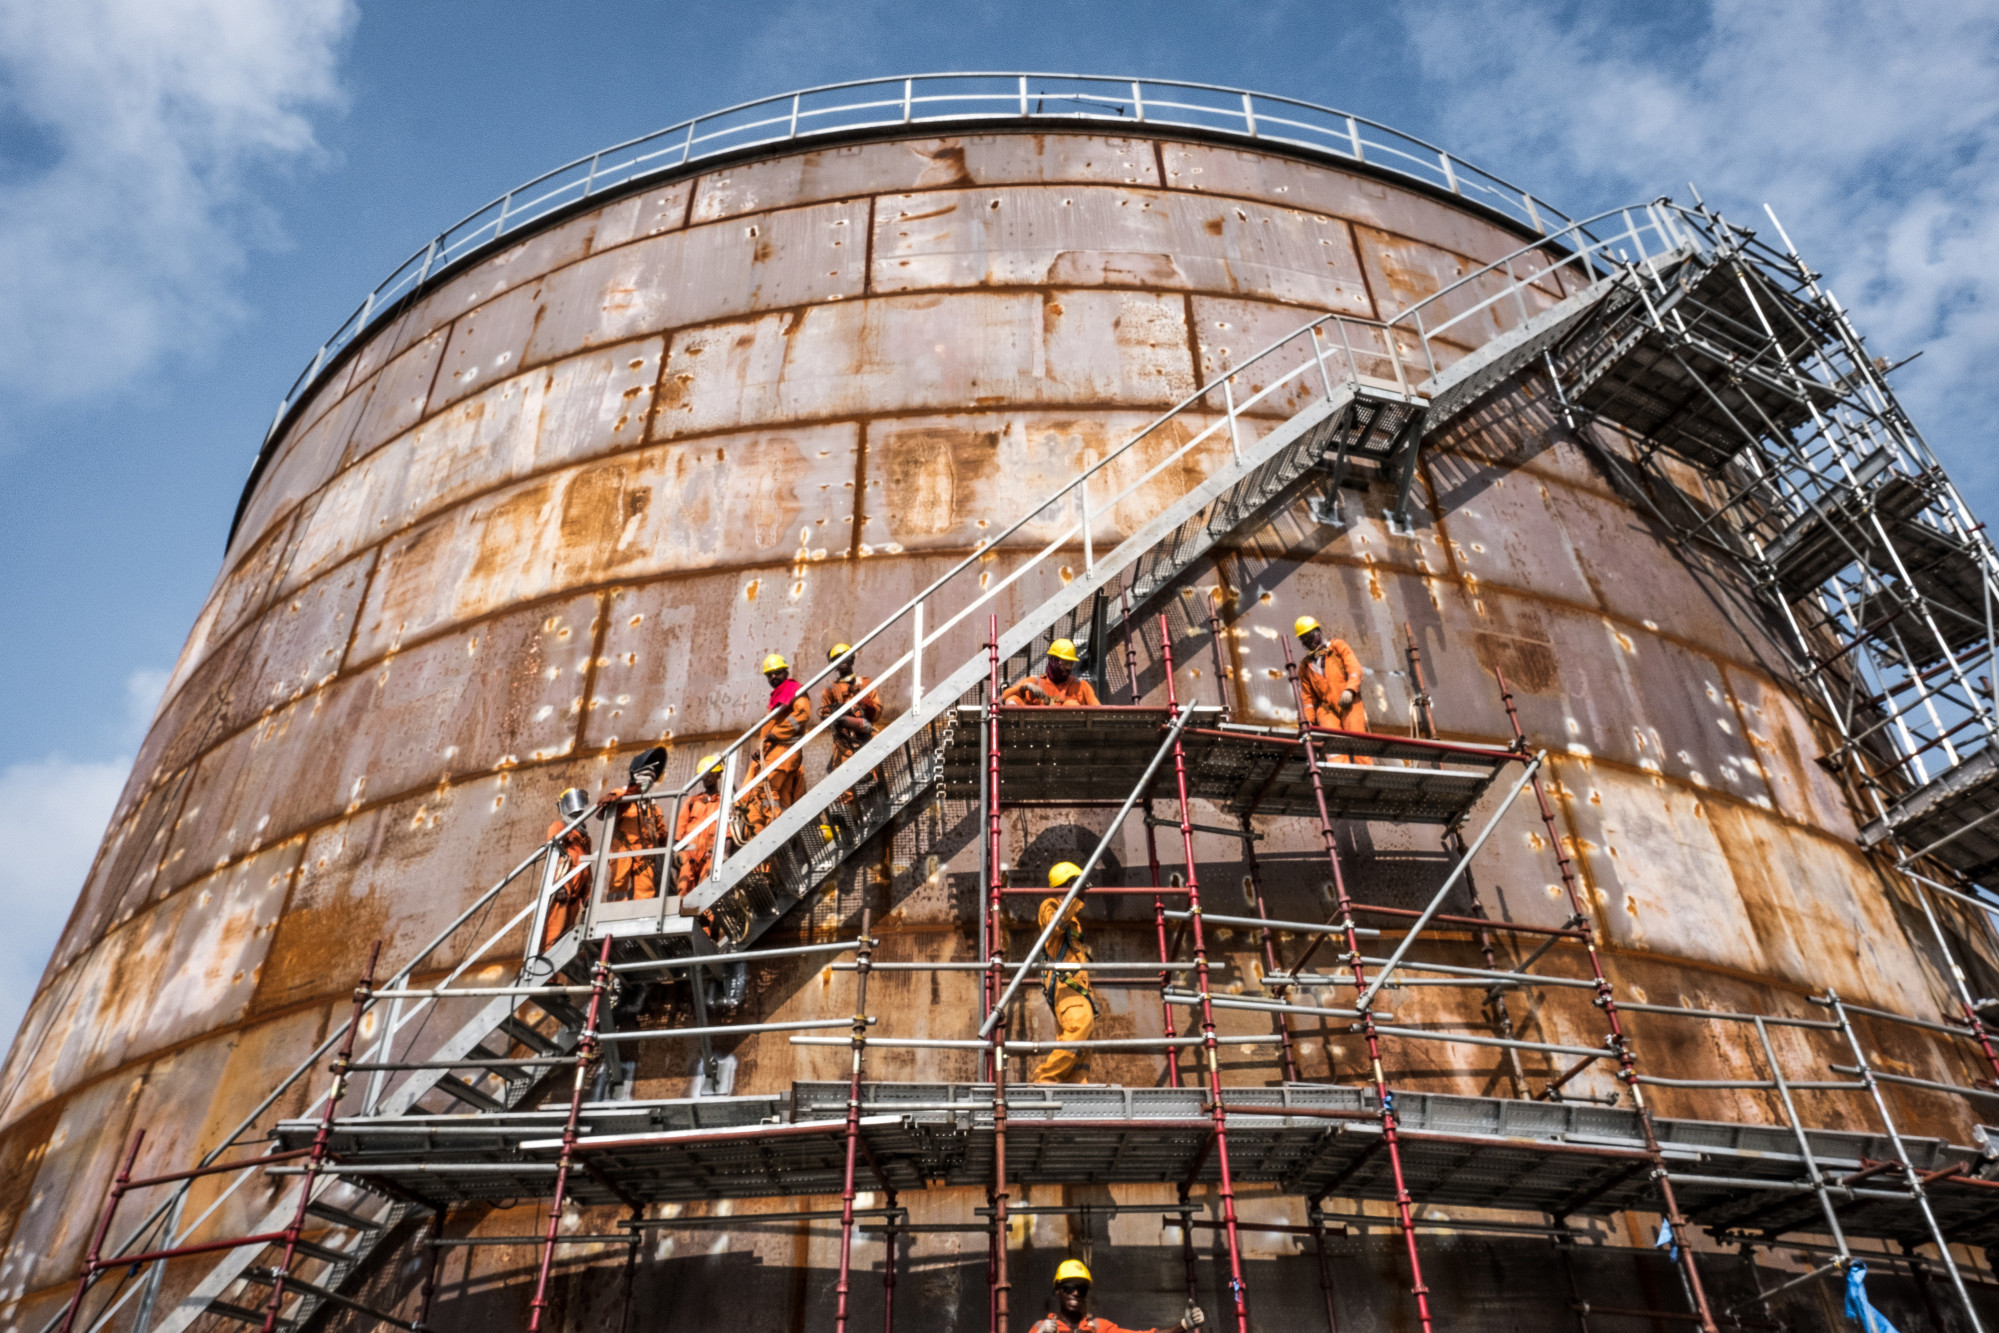 Workers climb scaffolding surrounding a storage tank at the under-construction Dangote Industries Ltd. oil refinery and fertilizer plant site in the Ibeju Lekki district, outside of Lagos, Nigeria, on Thursday, July 5, 2018. The $10 billion refinery, set to be one of the worlds largest and process 650,000 barrels of crude a day, should be near full capacity by mid-2020, Devakumar Edwin, group executive director at Dangote Industries said in an interview. Photographer: Tom Saater/Bloomberg